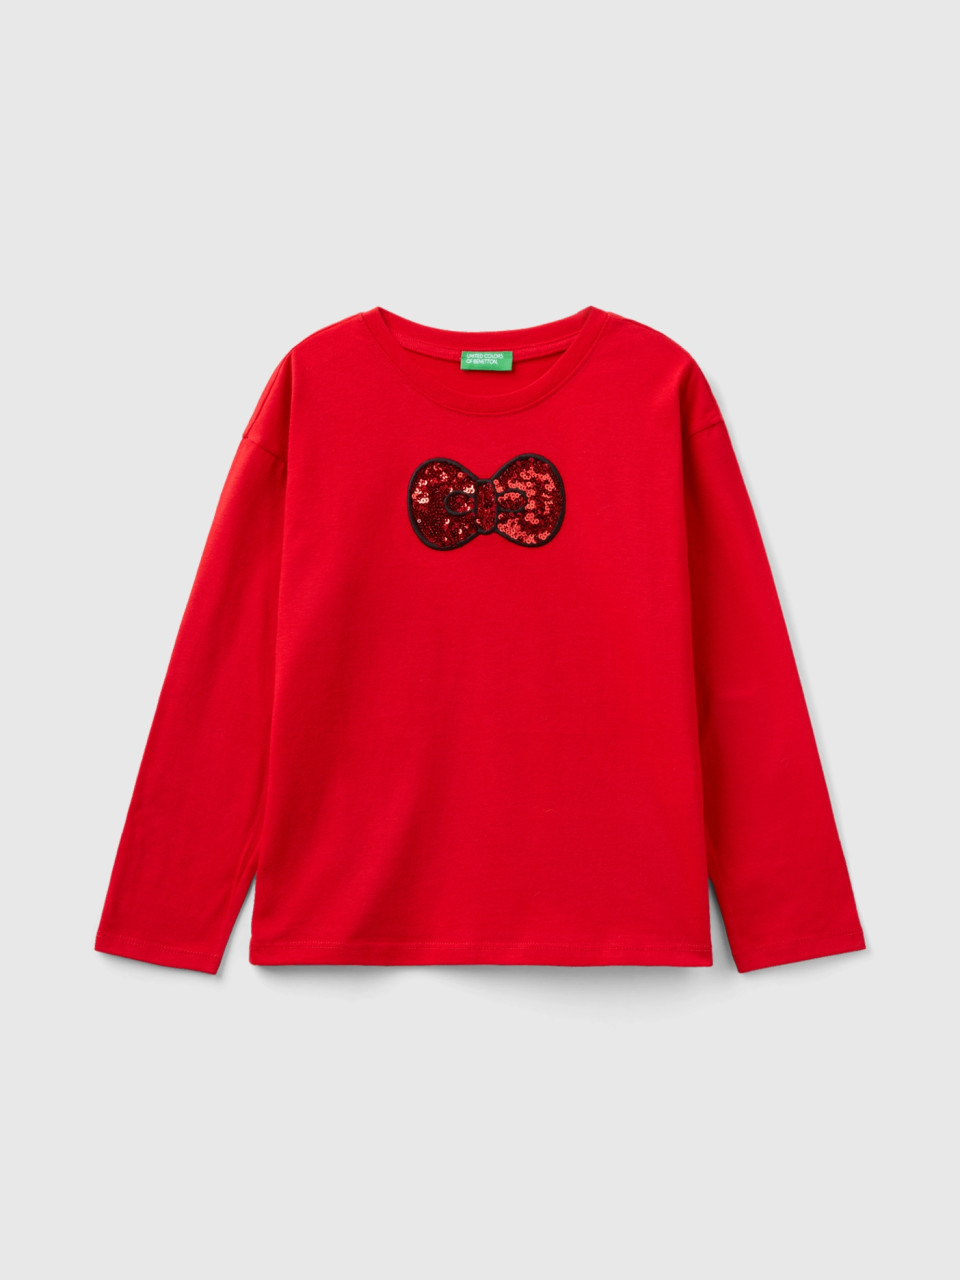 Benetton, Warm Cotton T-shirt With Sequins, Red, Kids